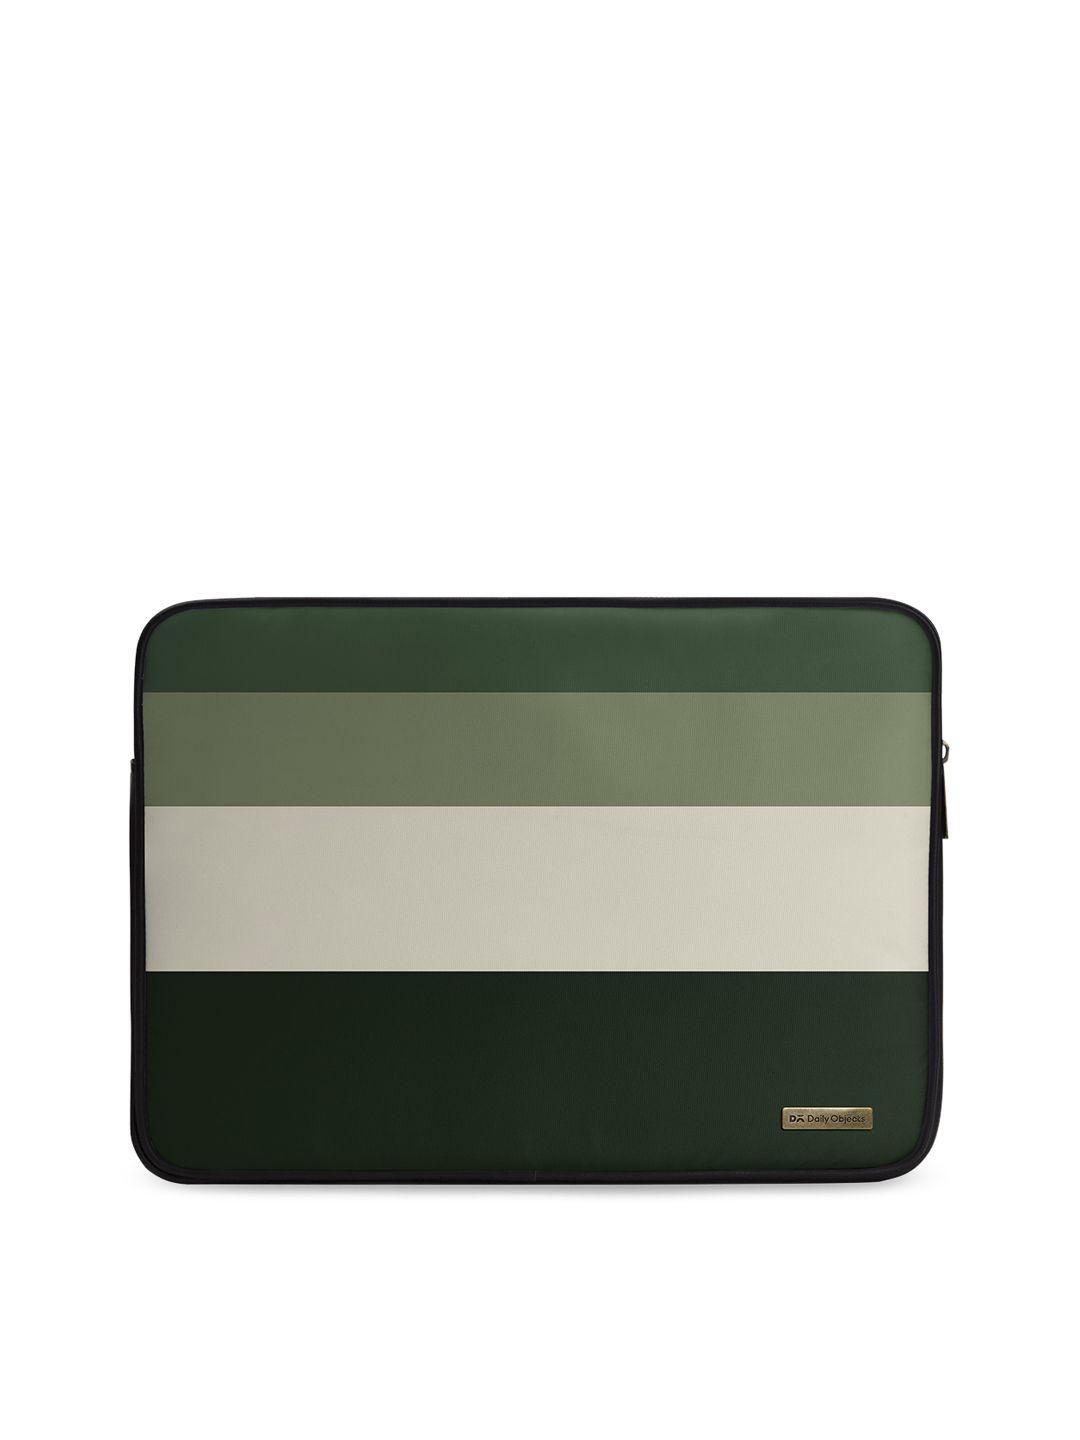 dailyobjects unisex multicoloured striped 14 inch laptop sleeve